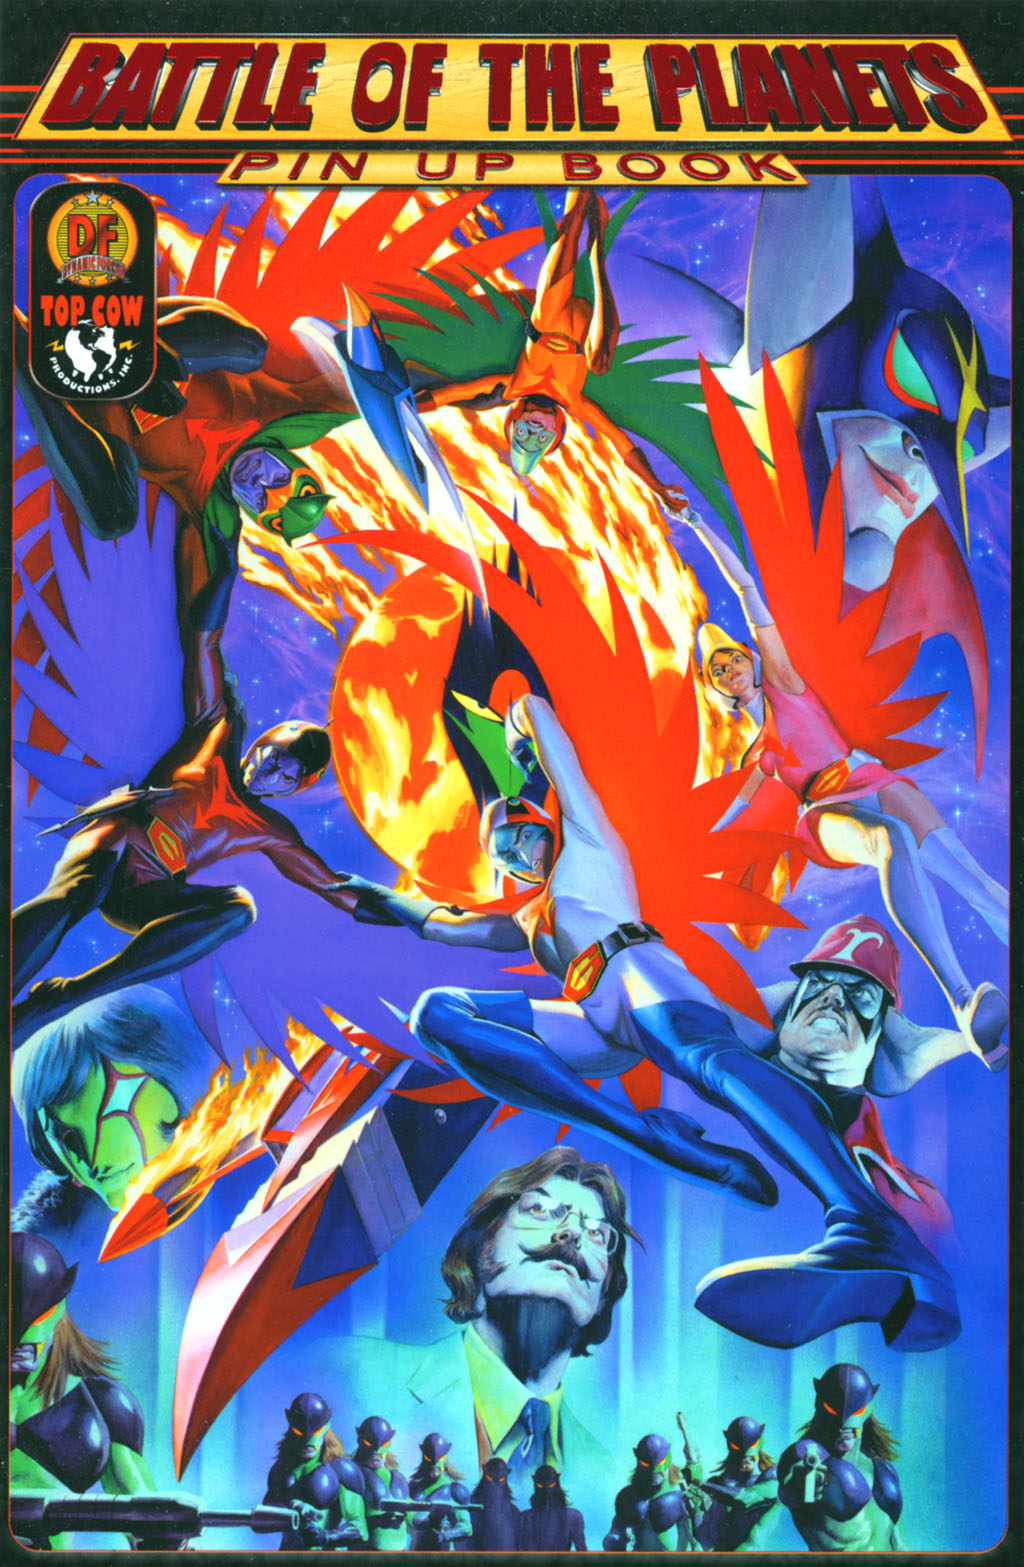 Read online Battle of the Planets comic -  Issue #1P - 1